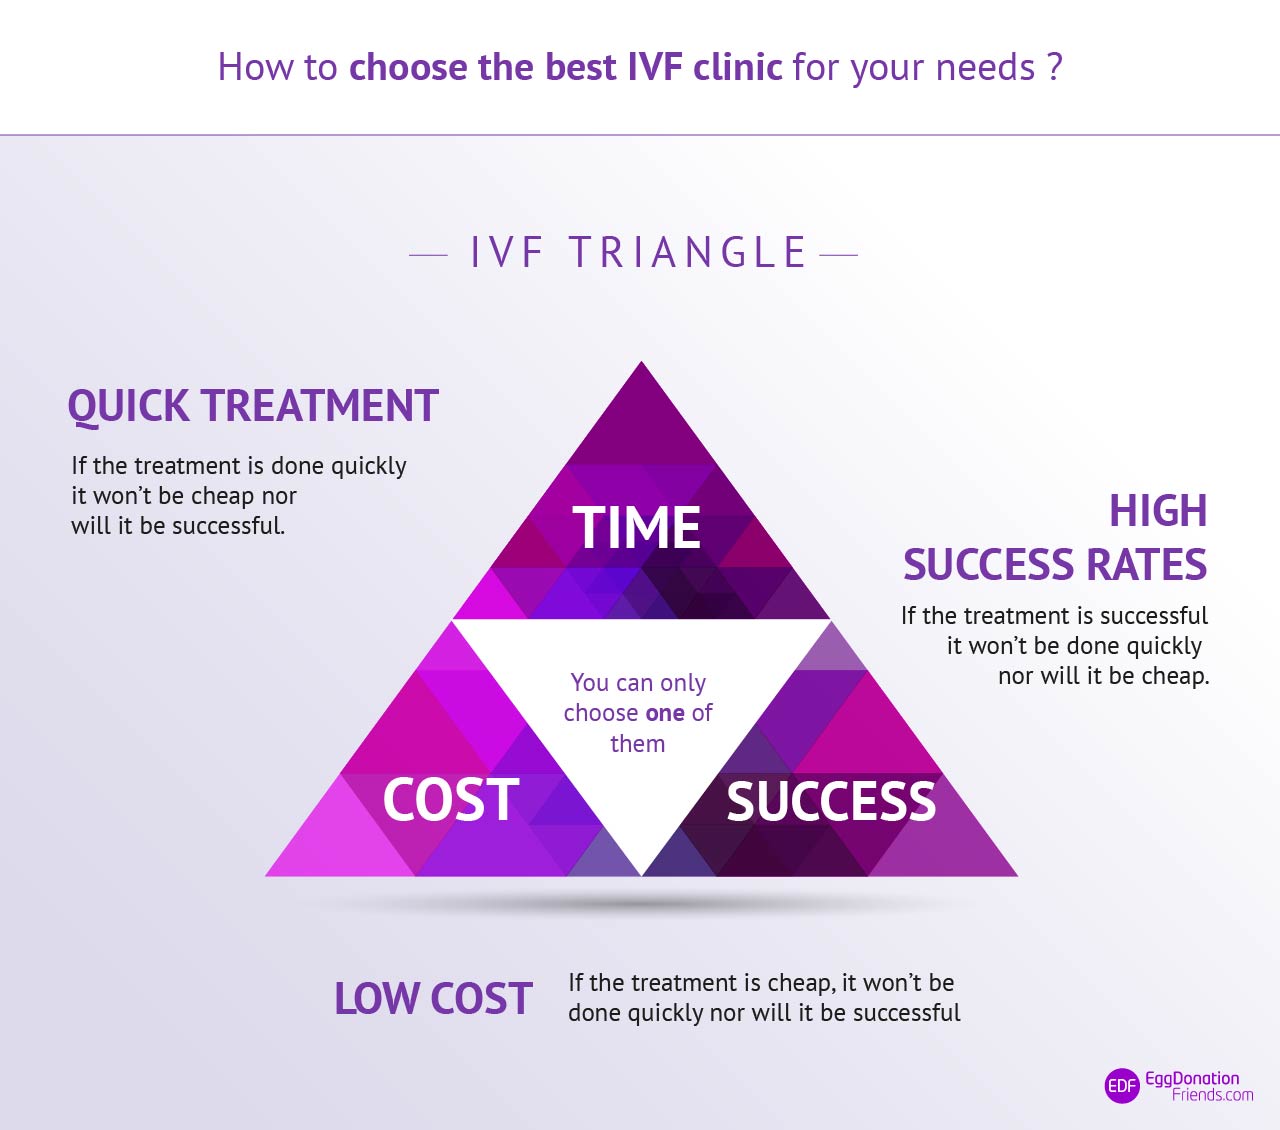 IVF Triangle - how to choose the best IVF clinic